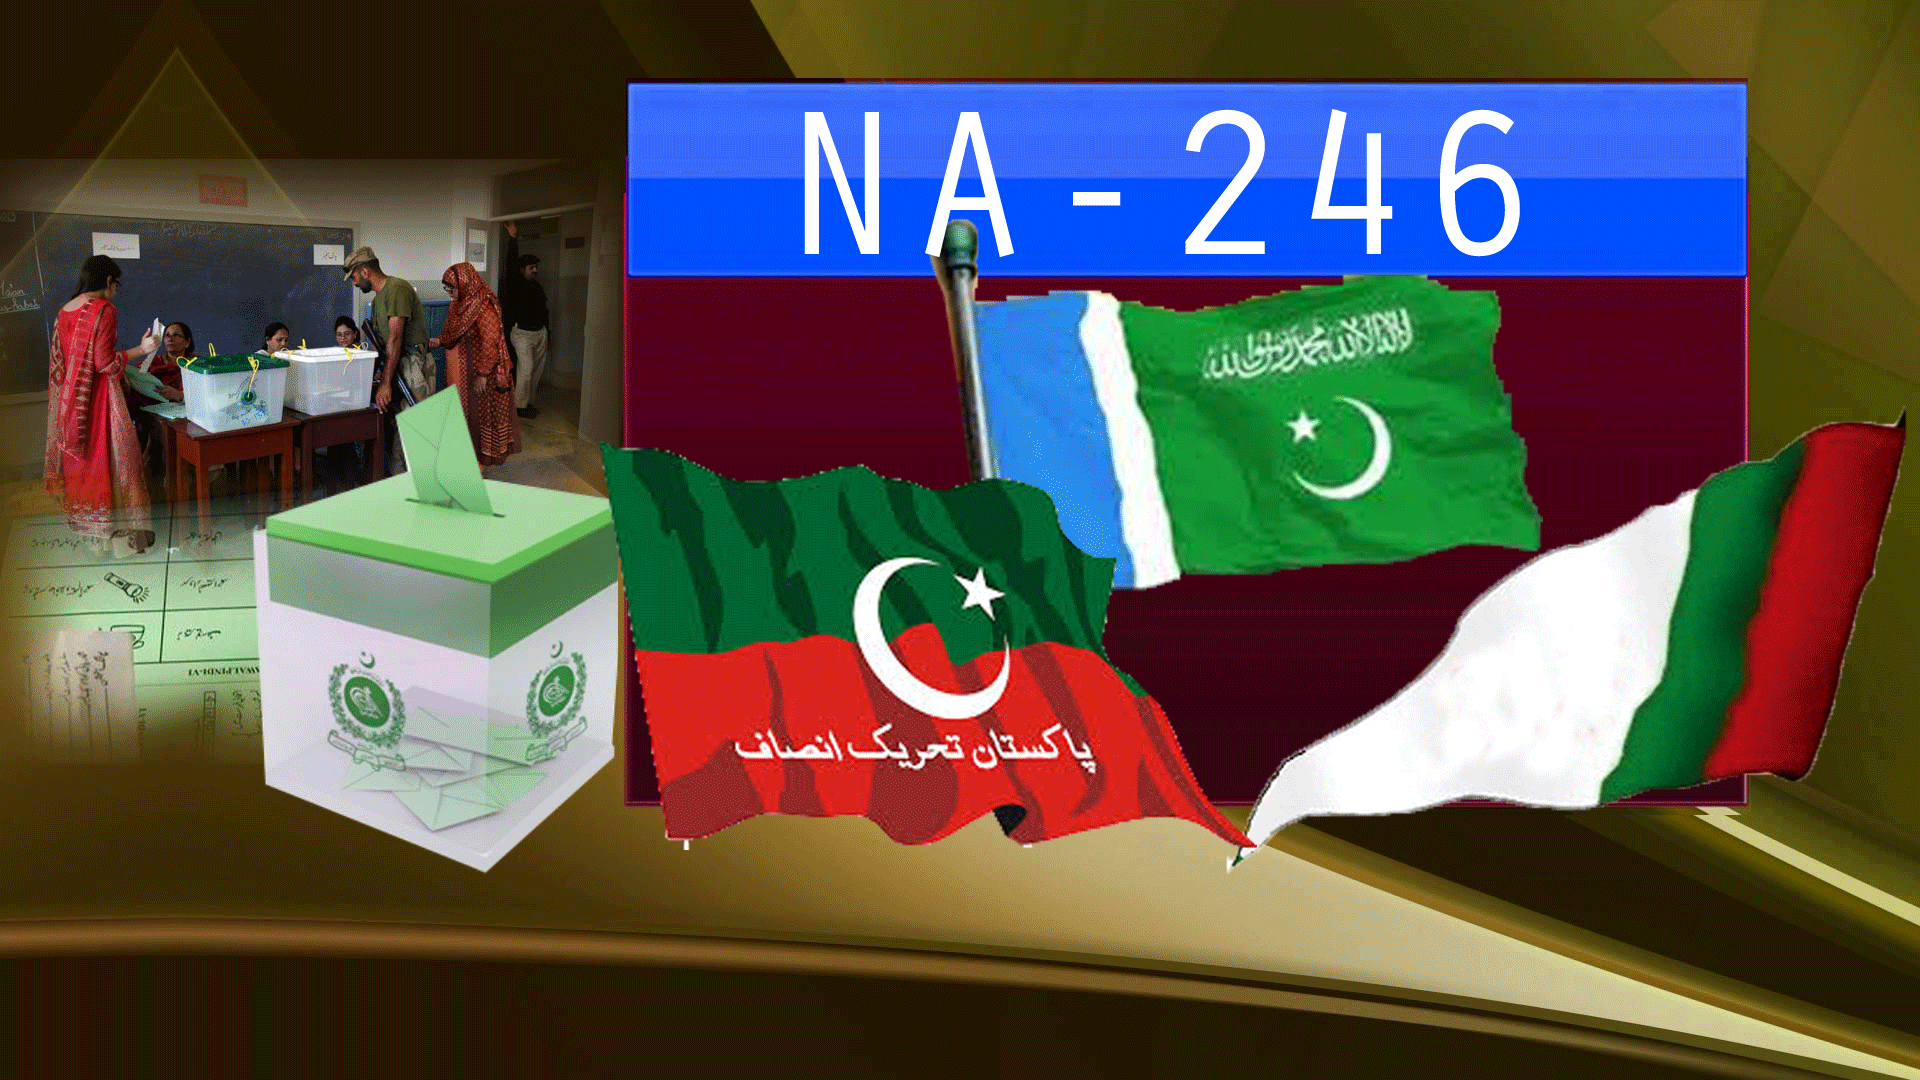 All arrangements finalised for NA-246 by-polls